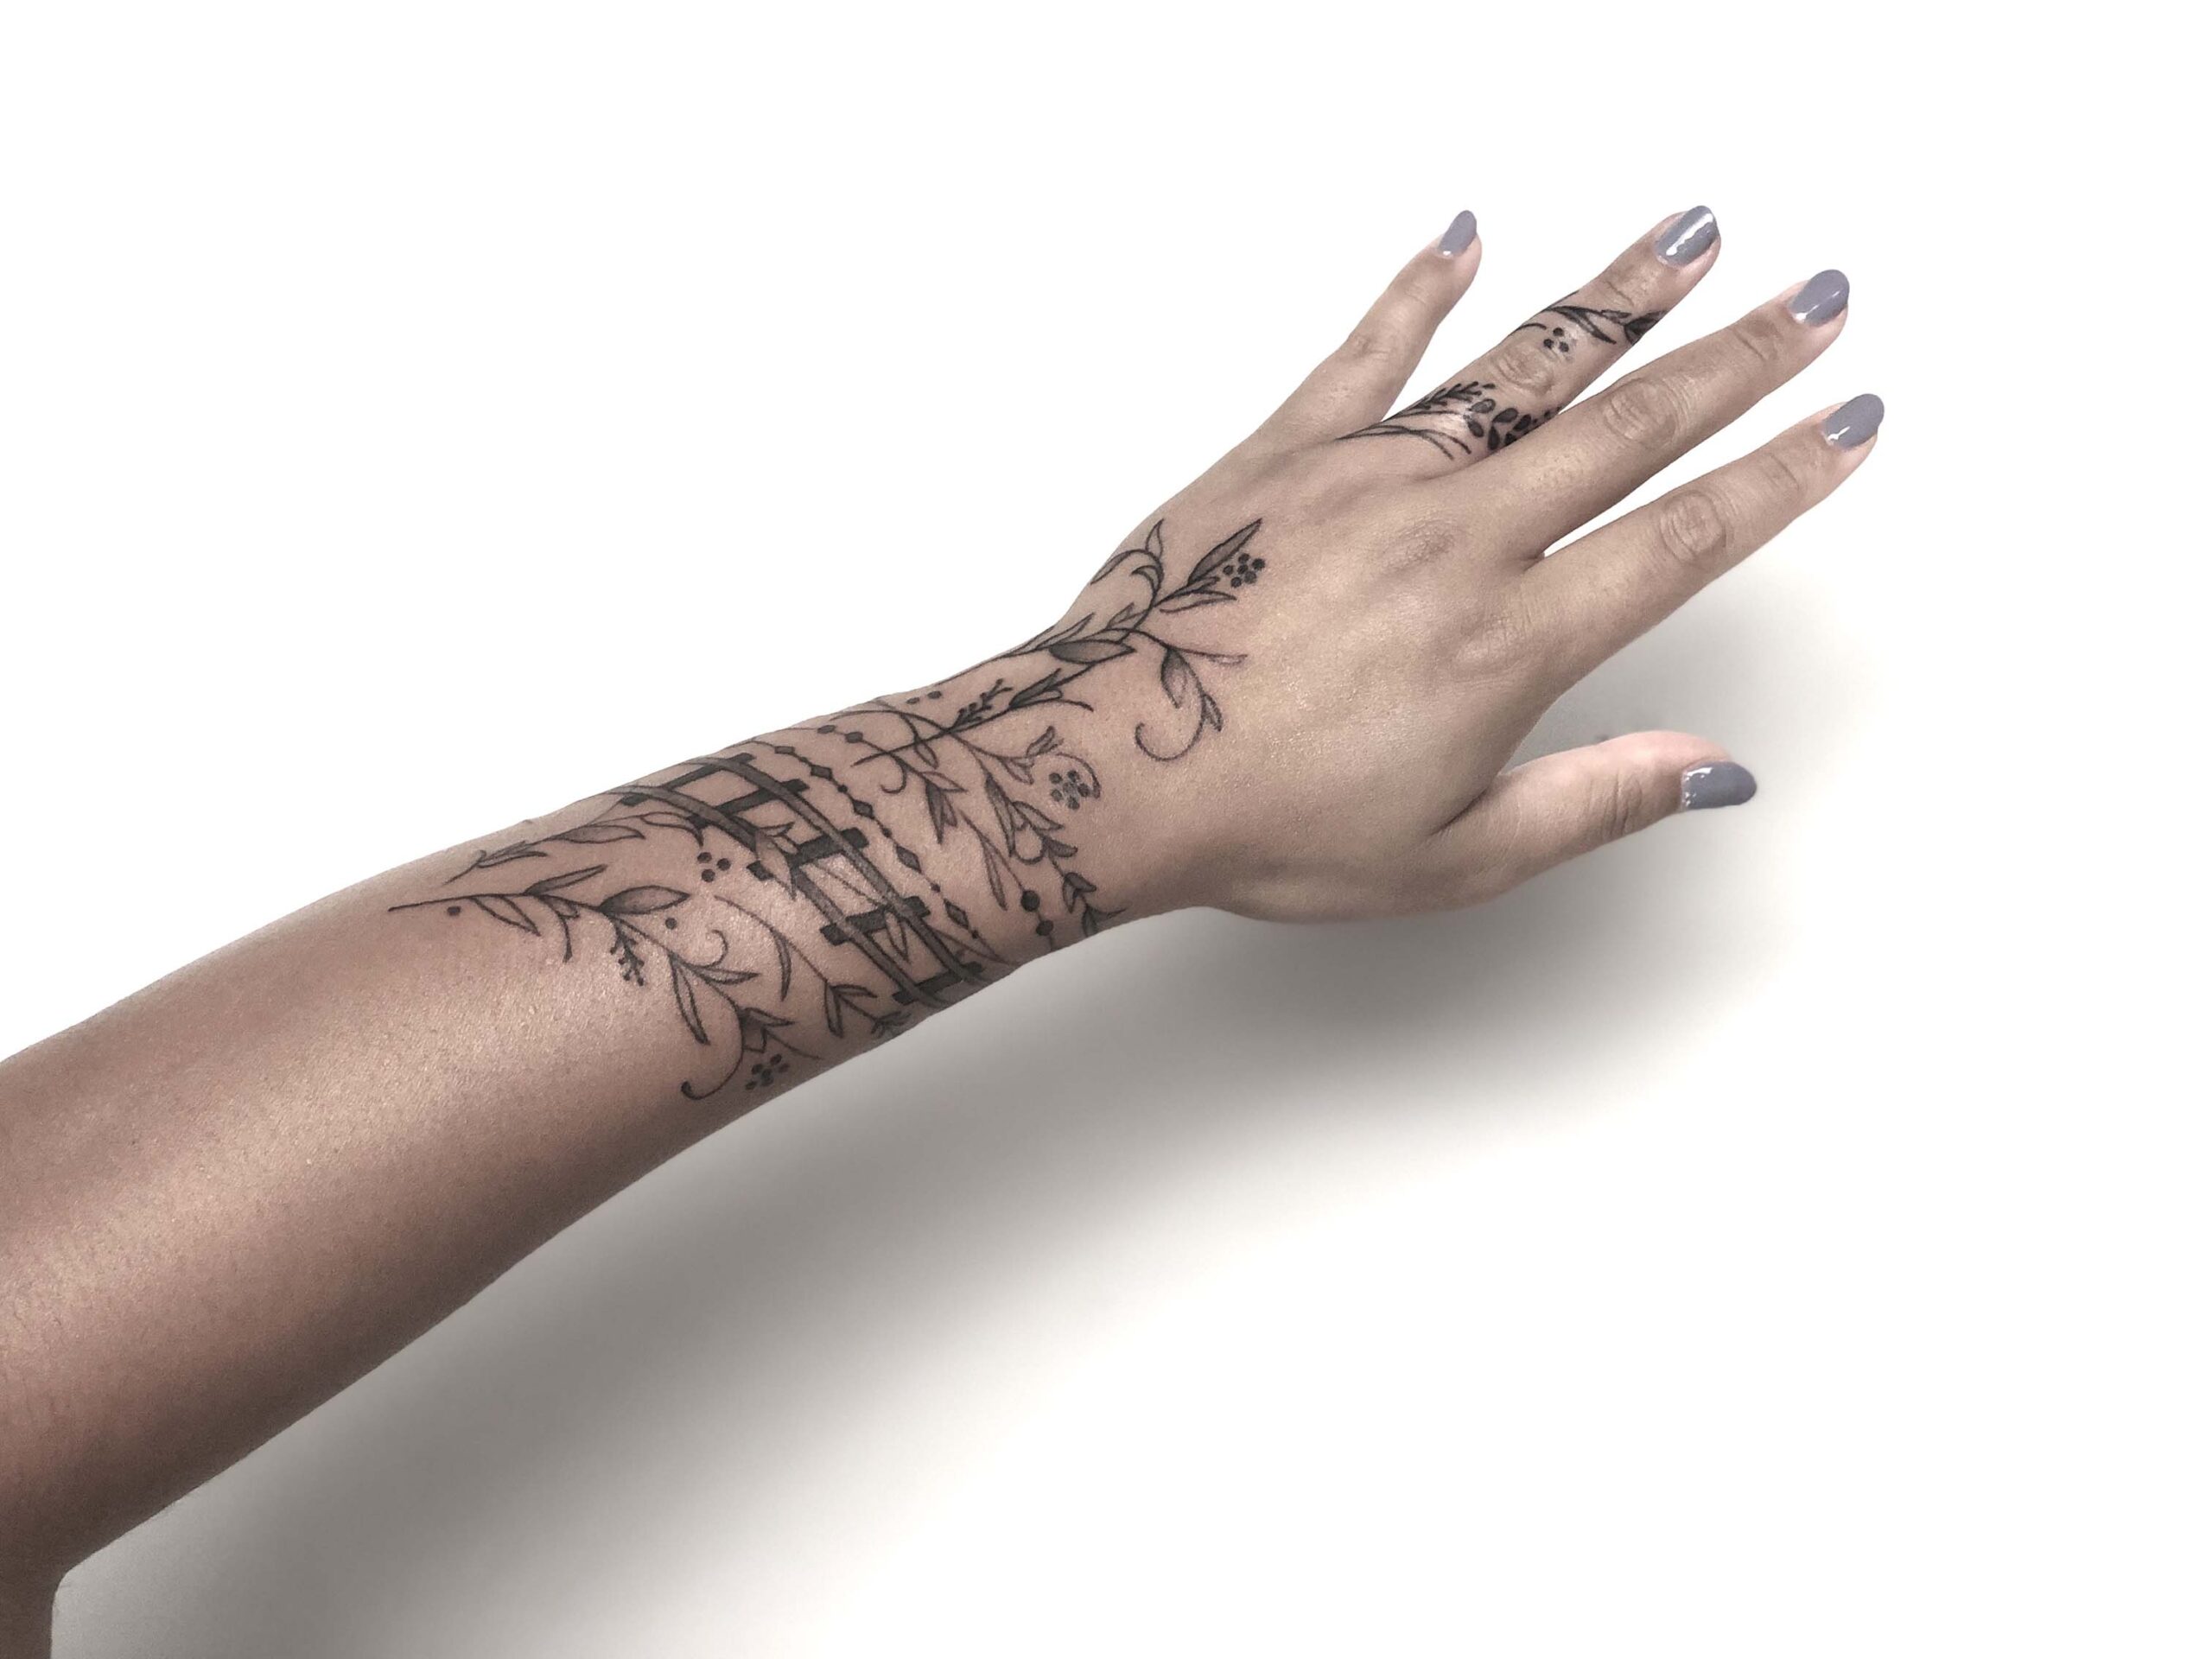 Pin by Sarah on Bücher  Feyre and rhysand Henna hand tattoo Tattoos